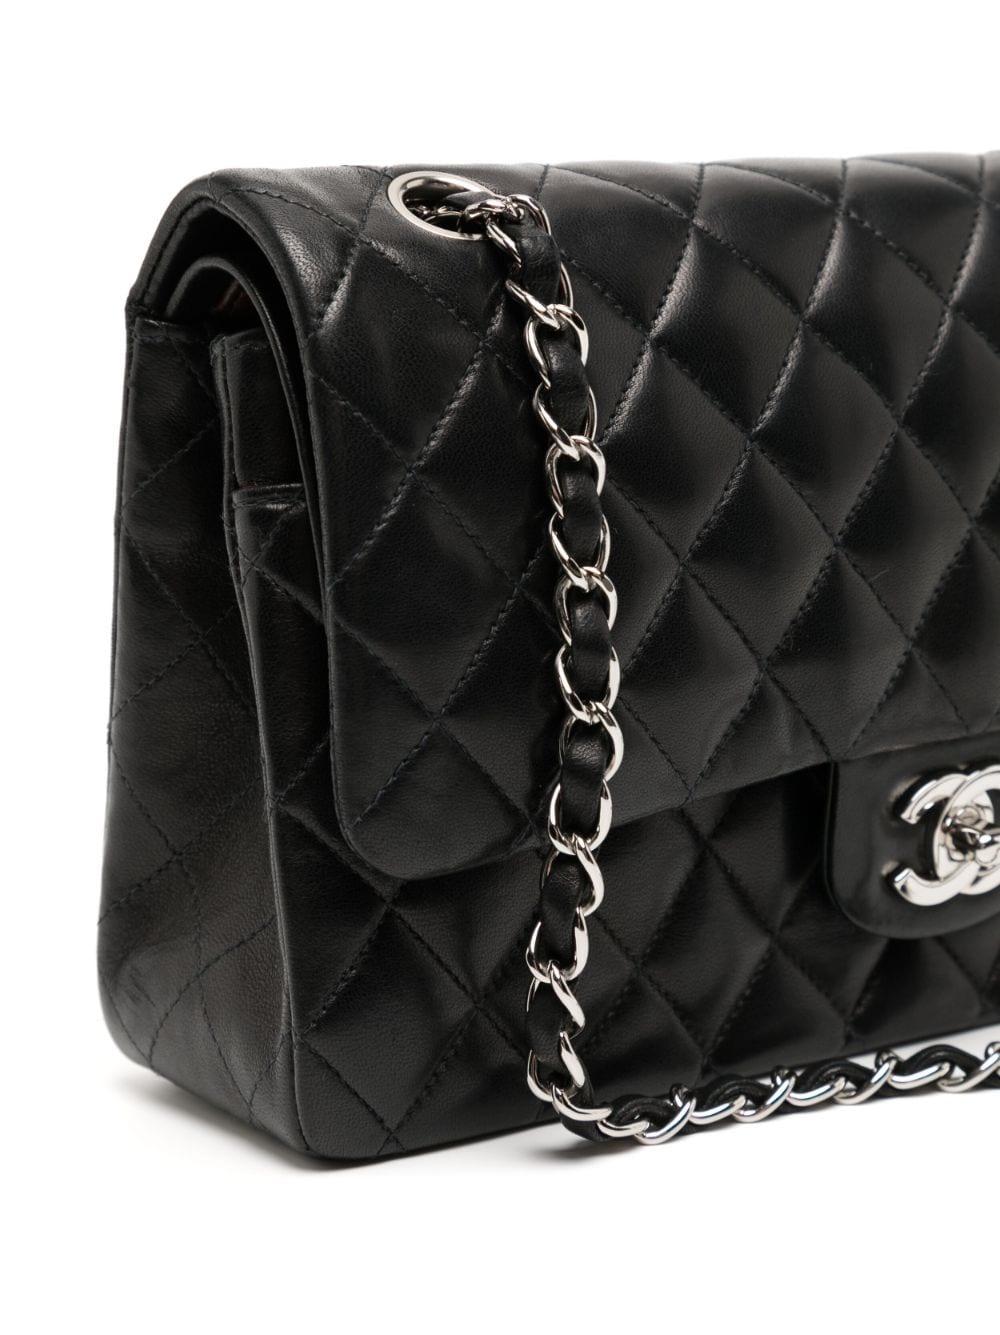 Chanel 2006 Vintage 2.55 Quilted Lambskin Medium Classic Double Flap Bag  For Sale 3